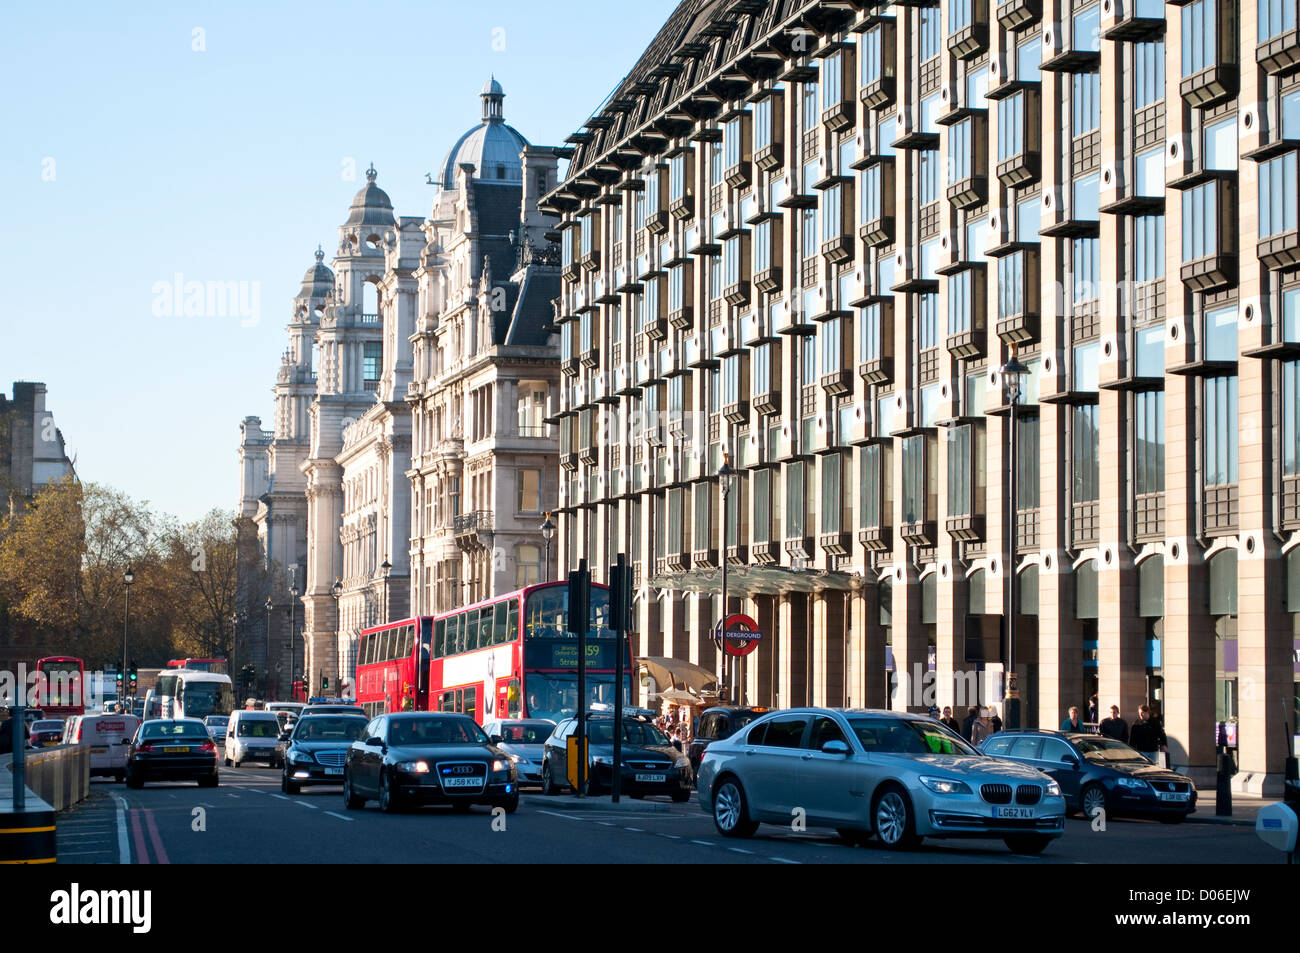 Portcullis House, opposite Big Ben and the Houses of Parliament, London, UK Stock Photo